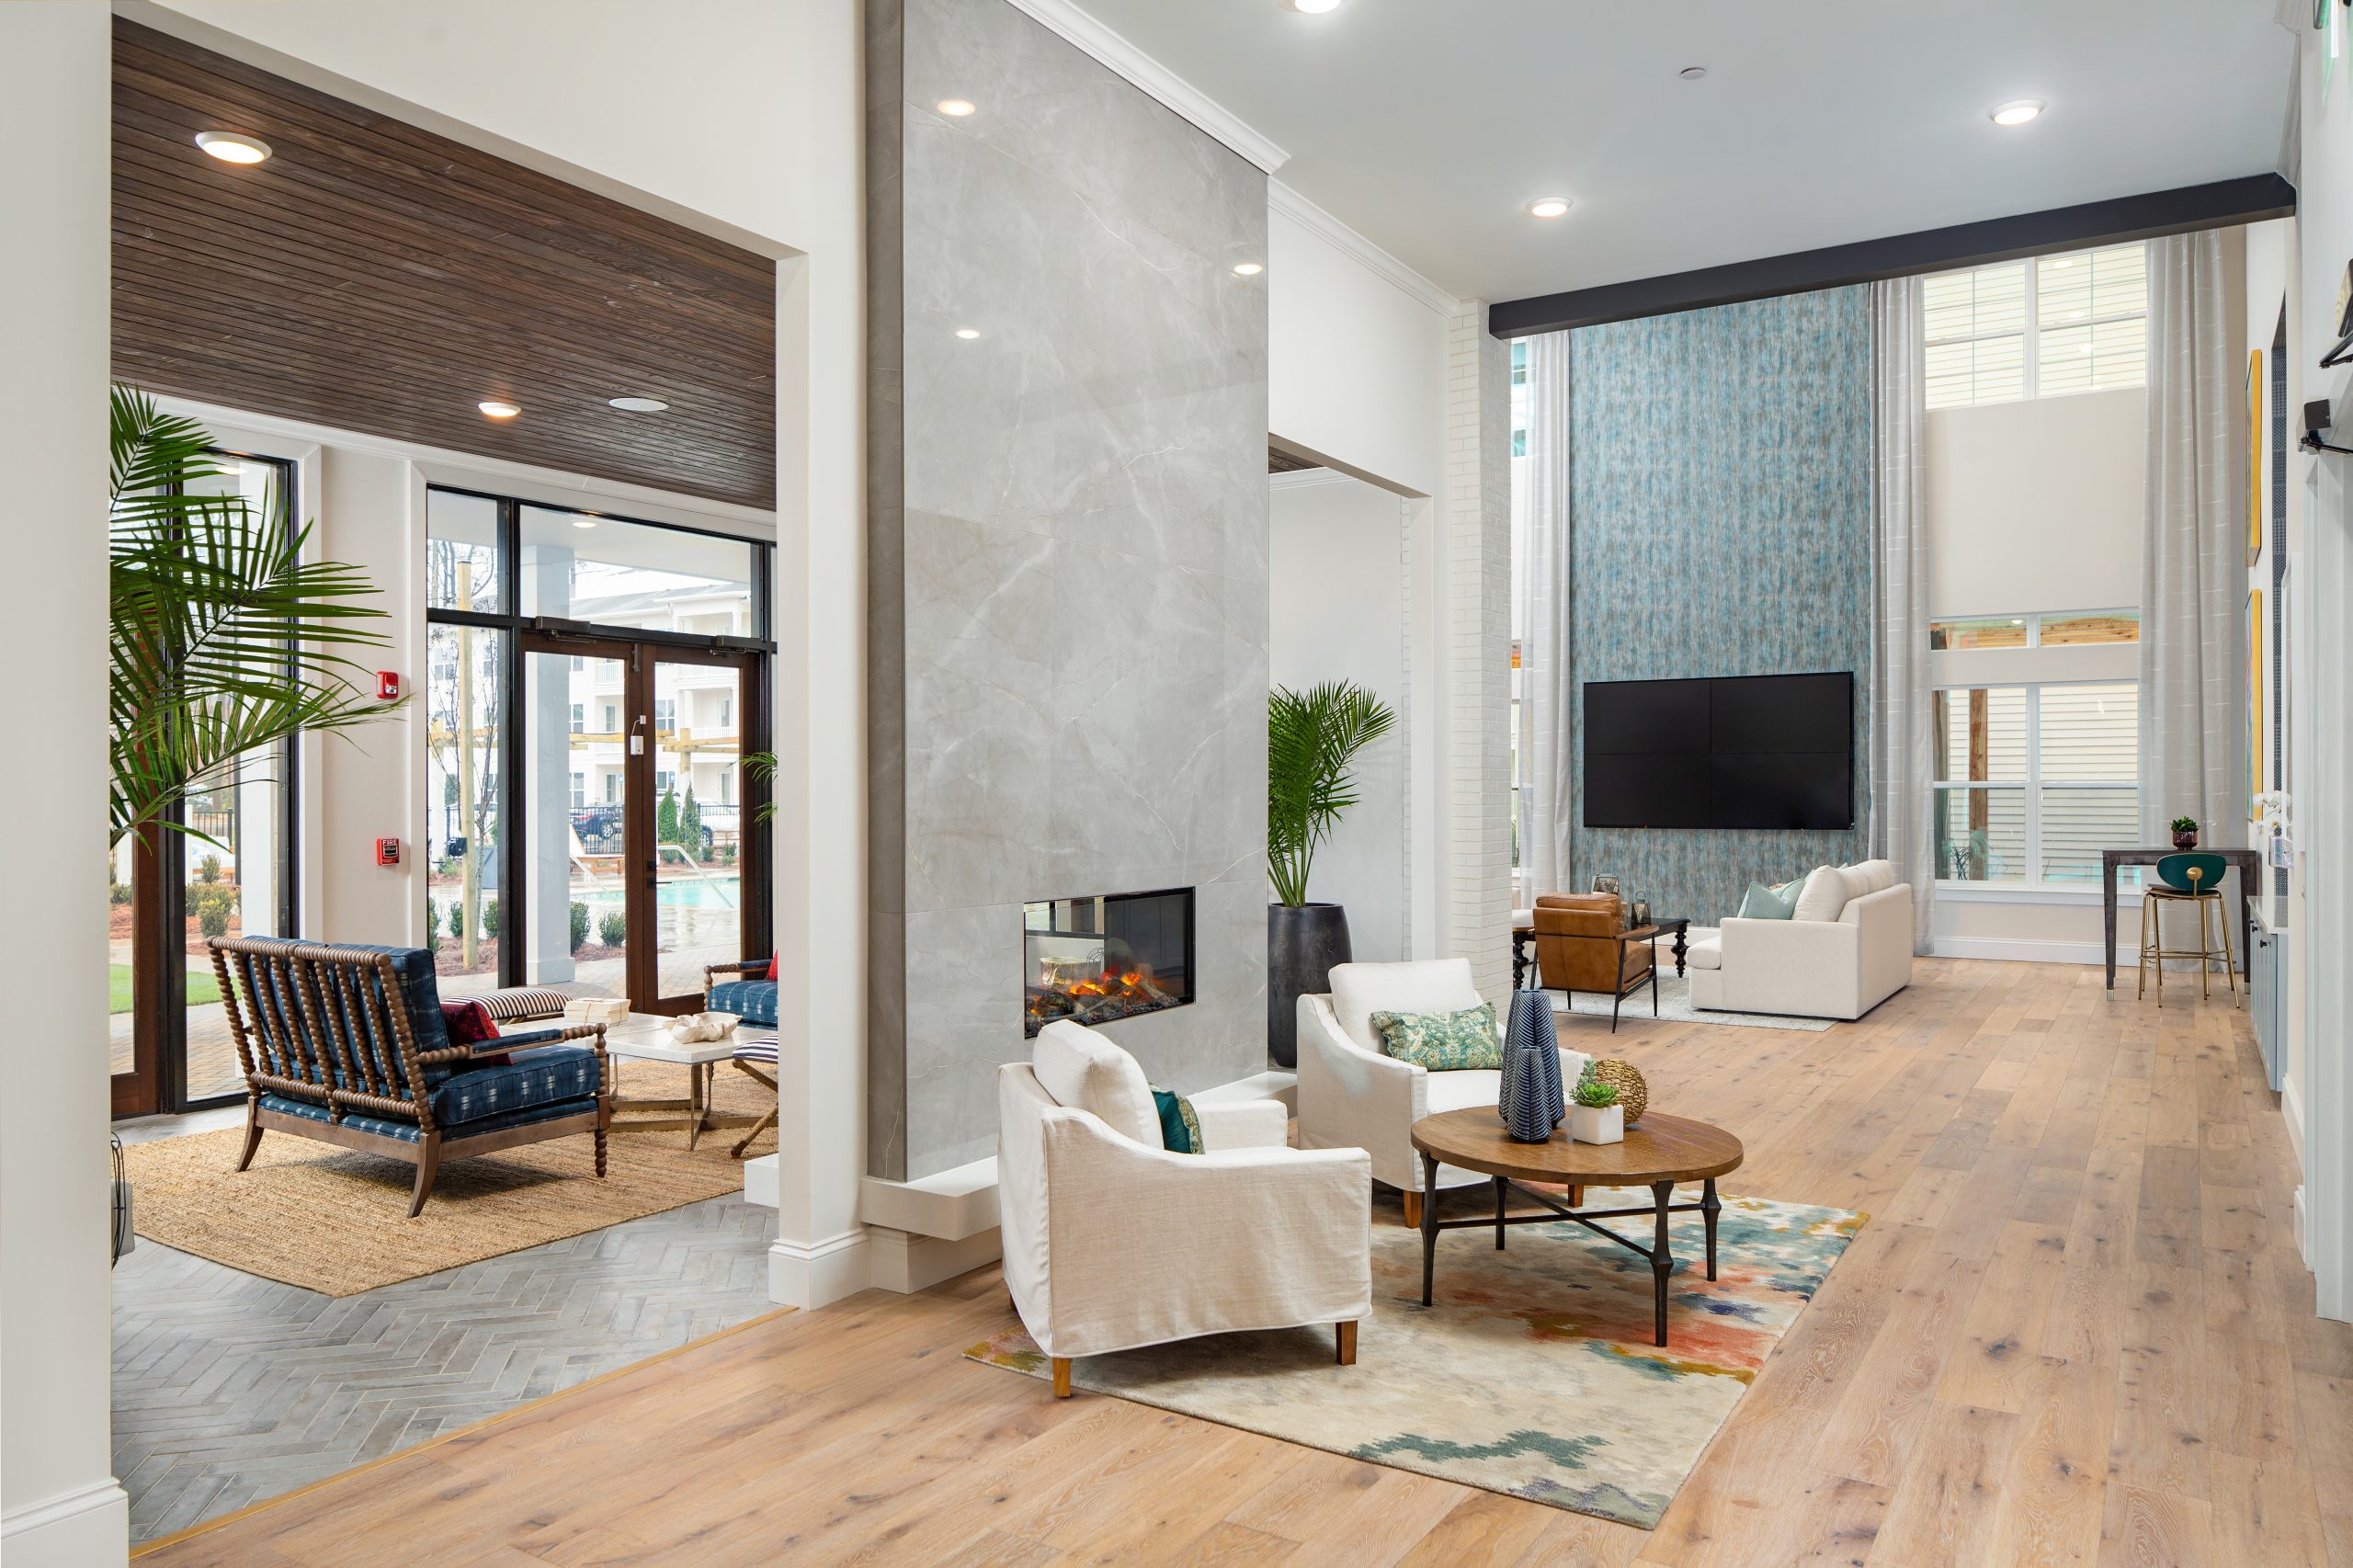 Crosby Design Group Completes Multi-Family Project at The Catherine of Roswell